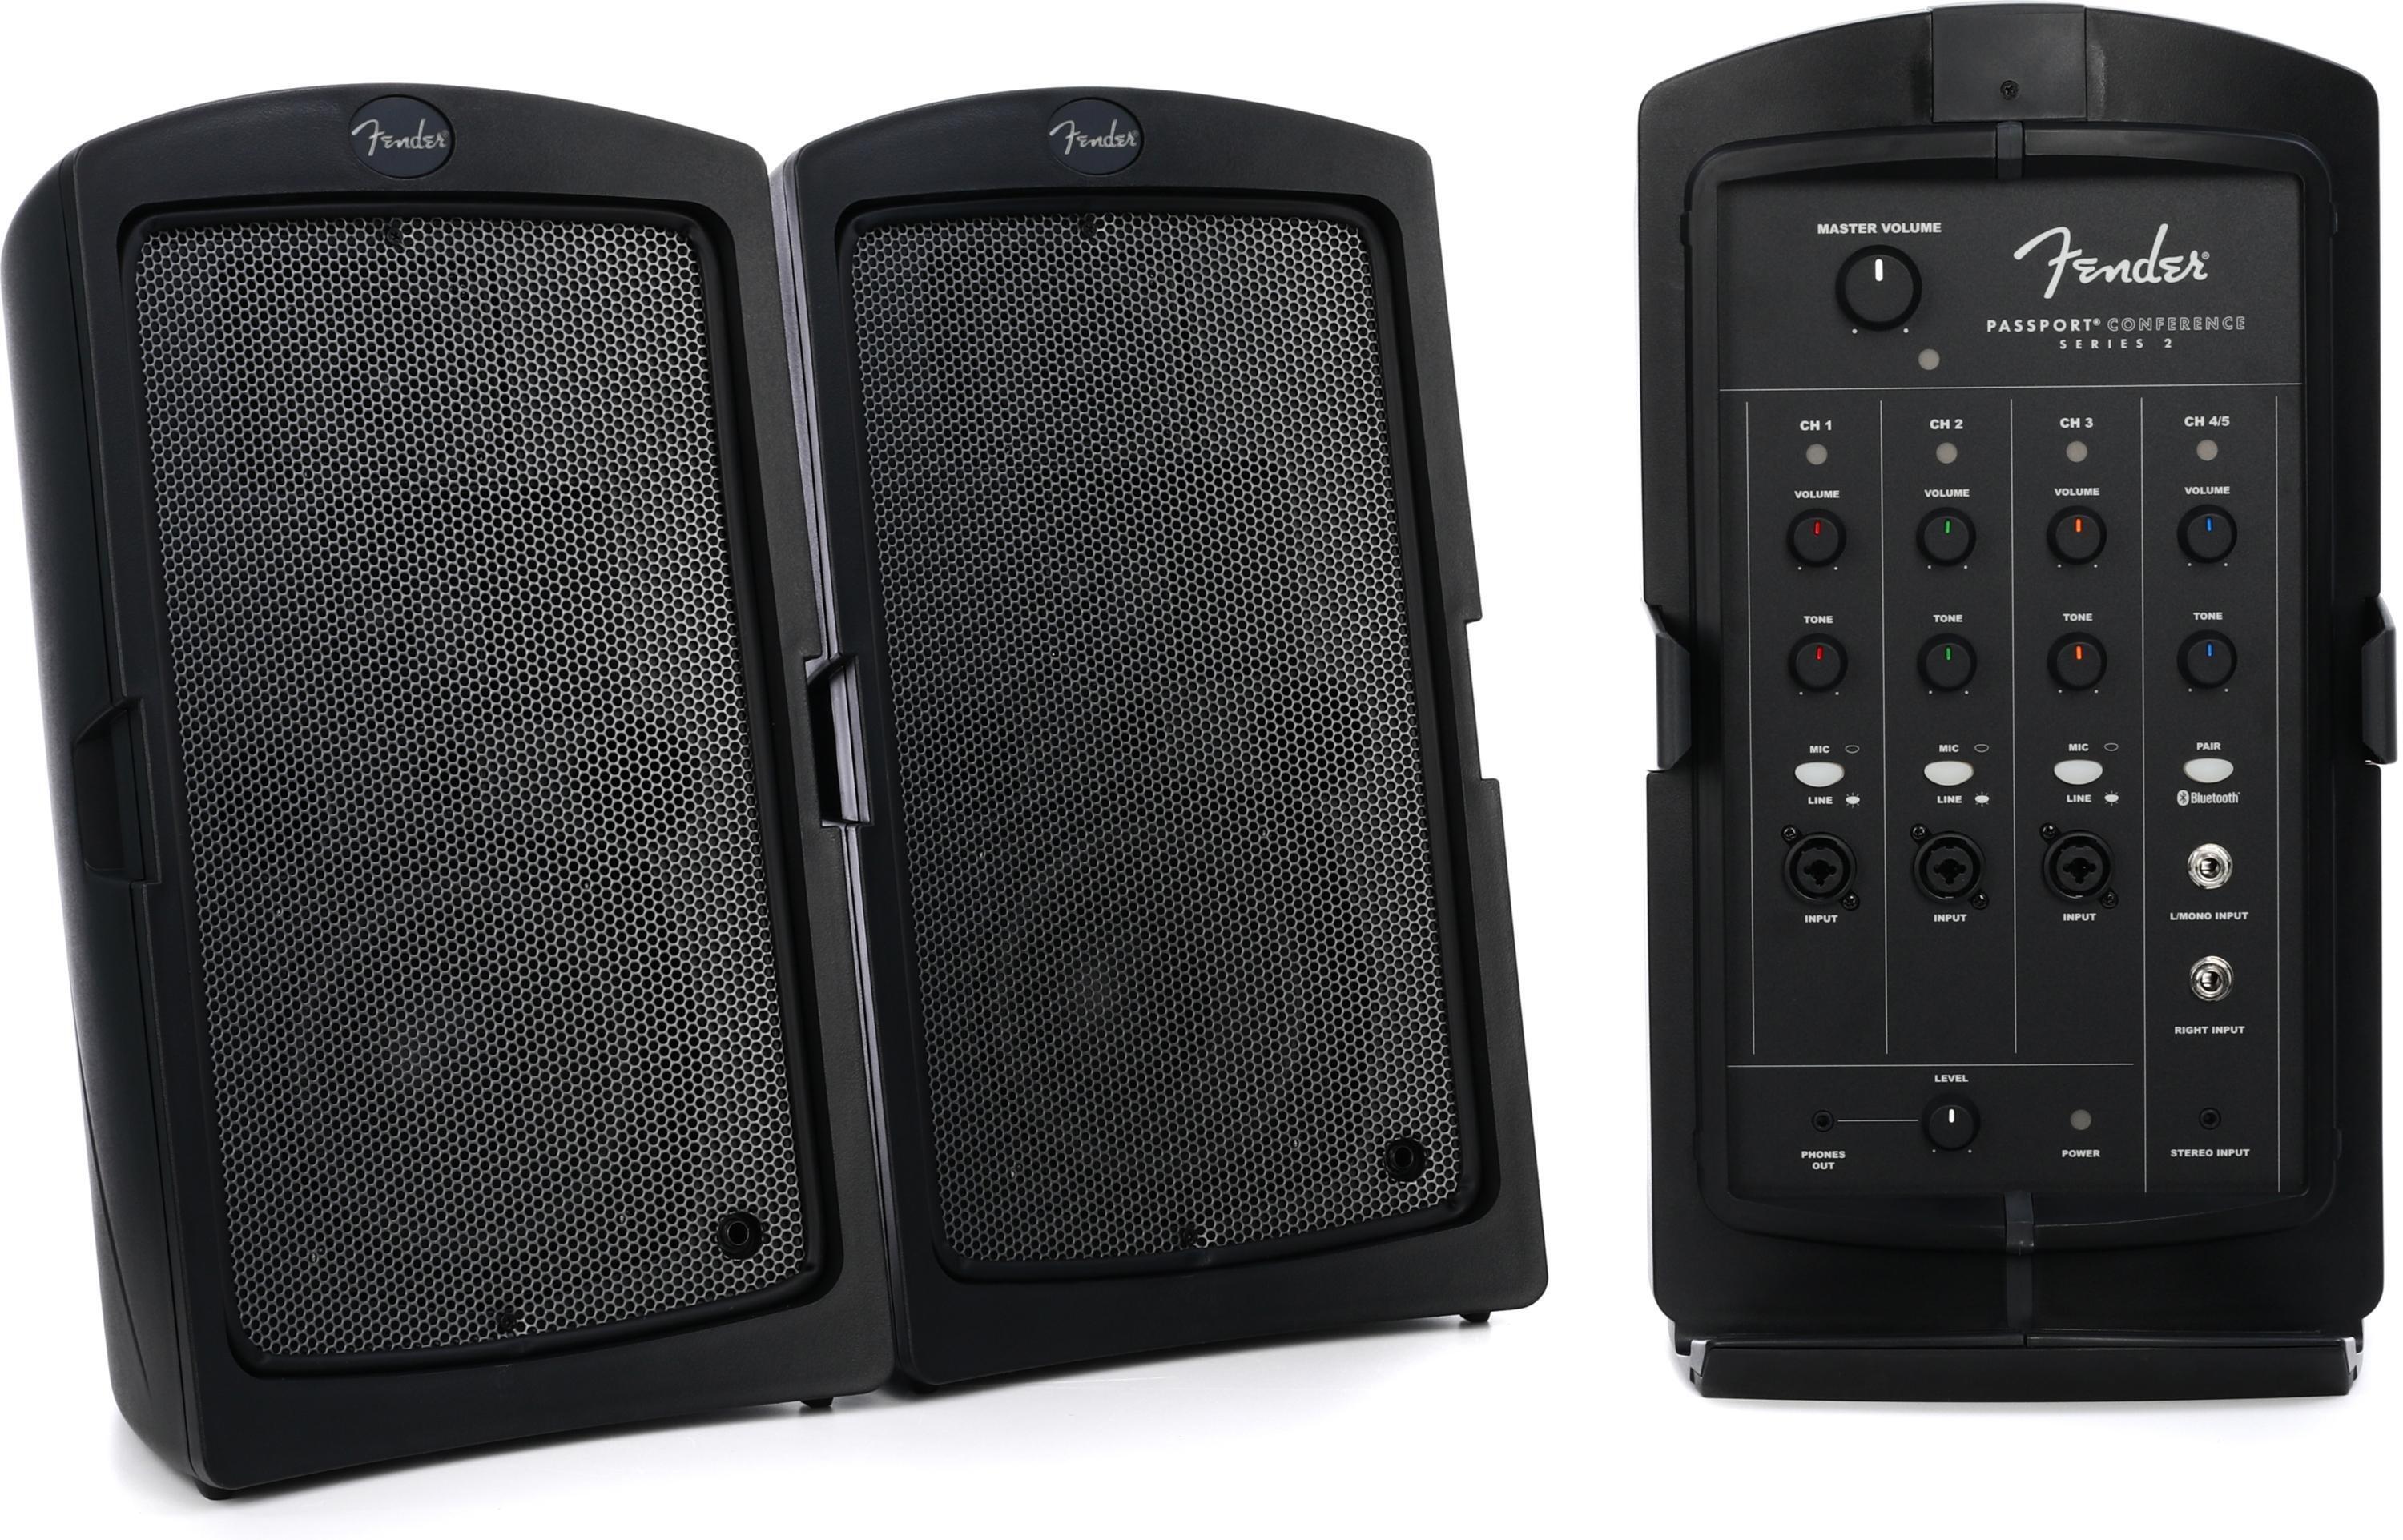 Fender Audio Passport Conference S2 Portable PA System